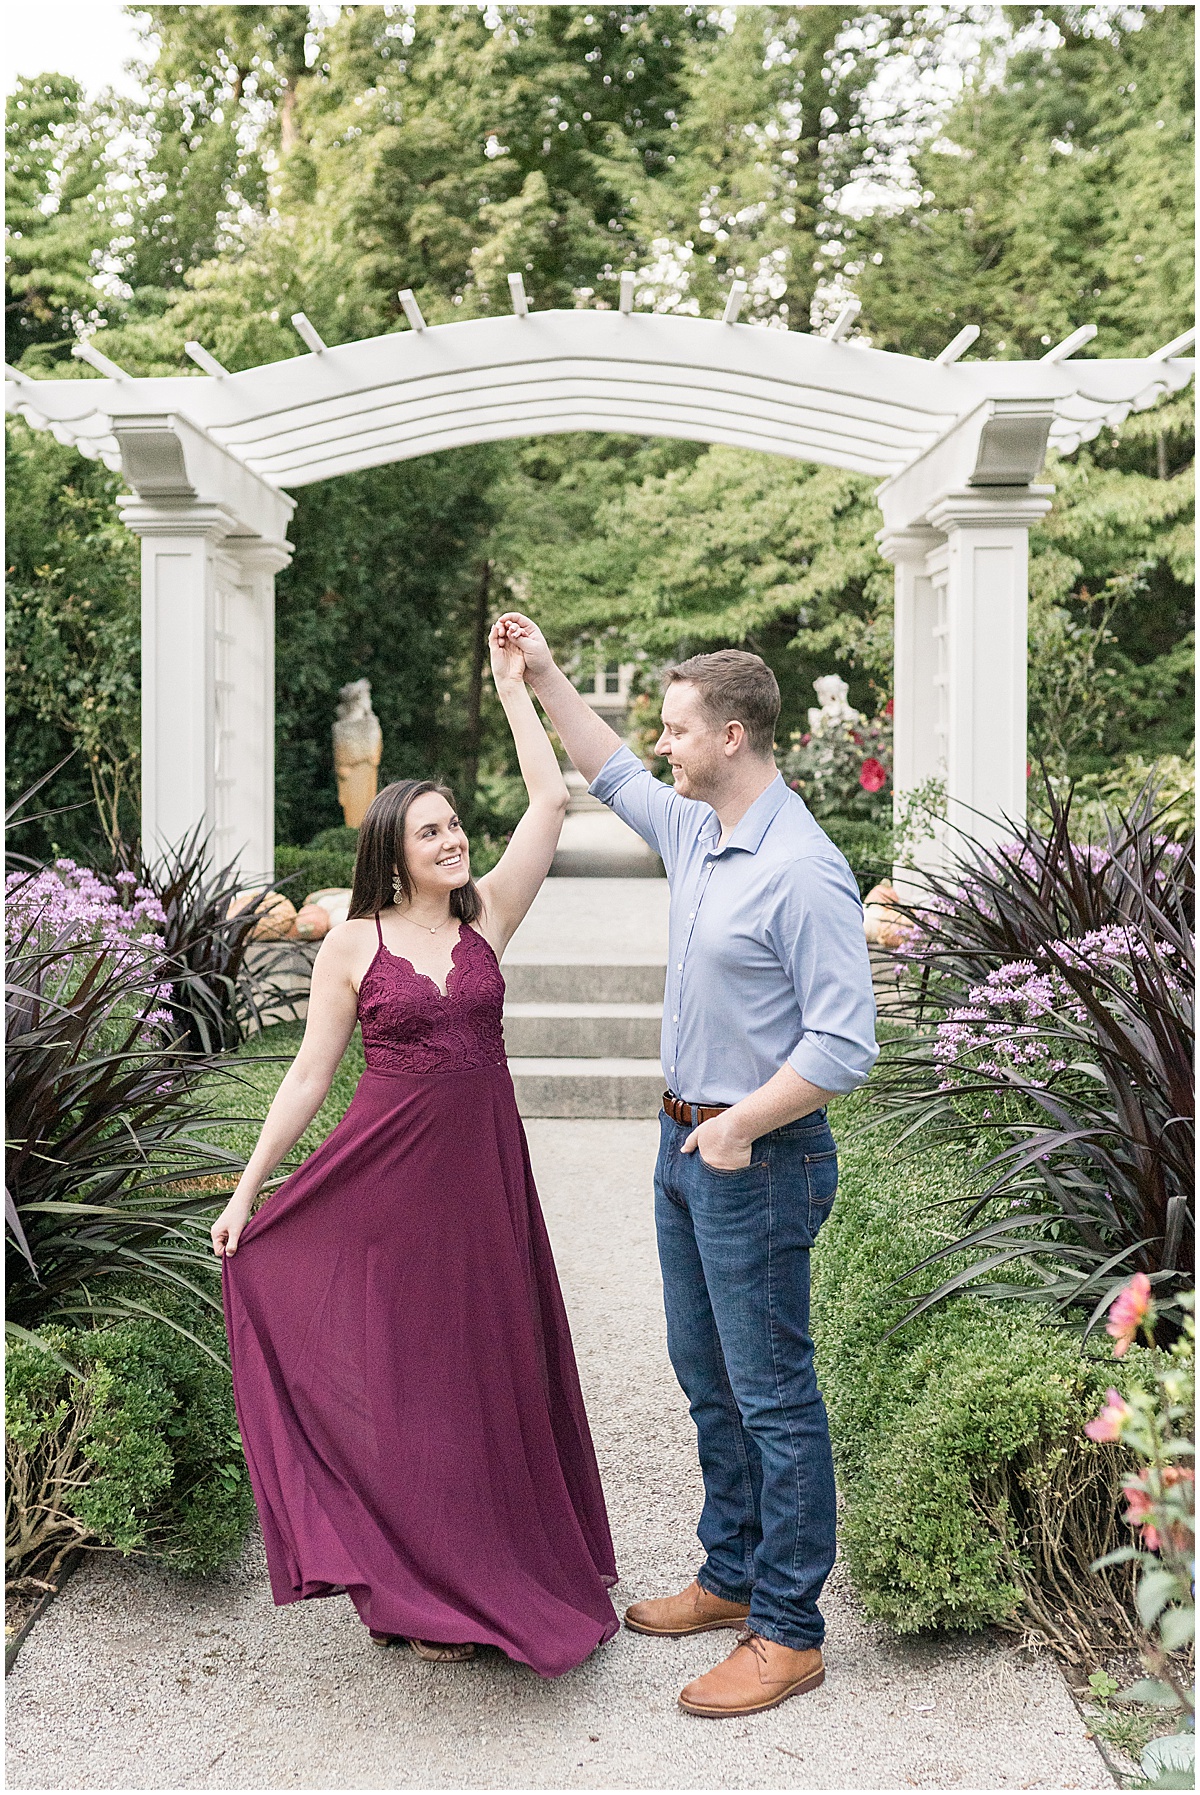 Couple dancing in garden at jewel tone engagement photos at Newfields